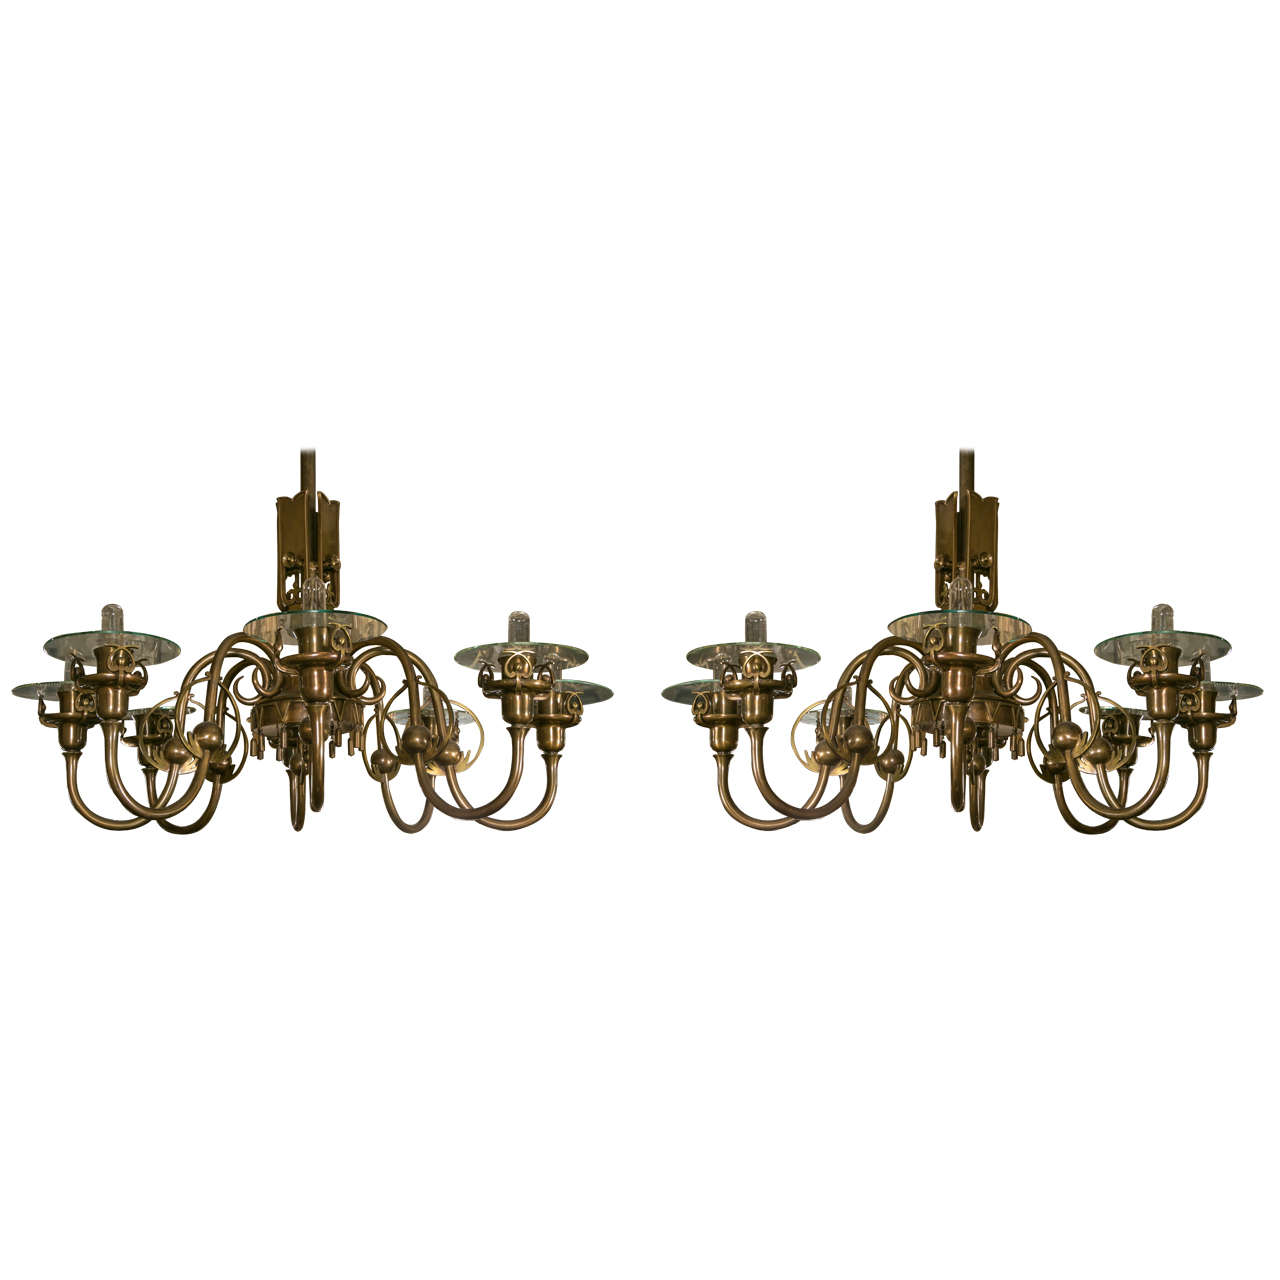 Nice chandelier designed by an architect in the 1940s,
Bronze, brass and glass.